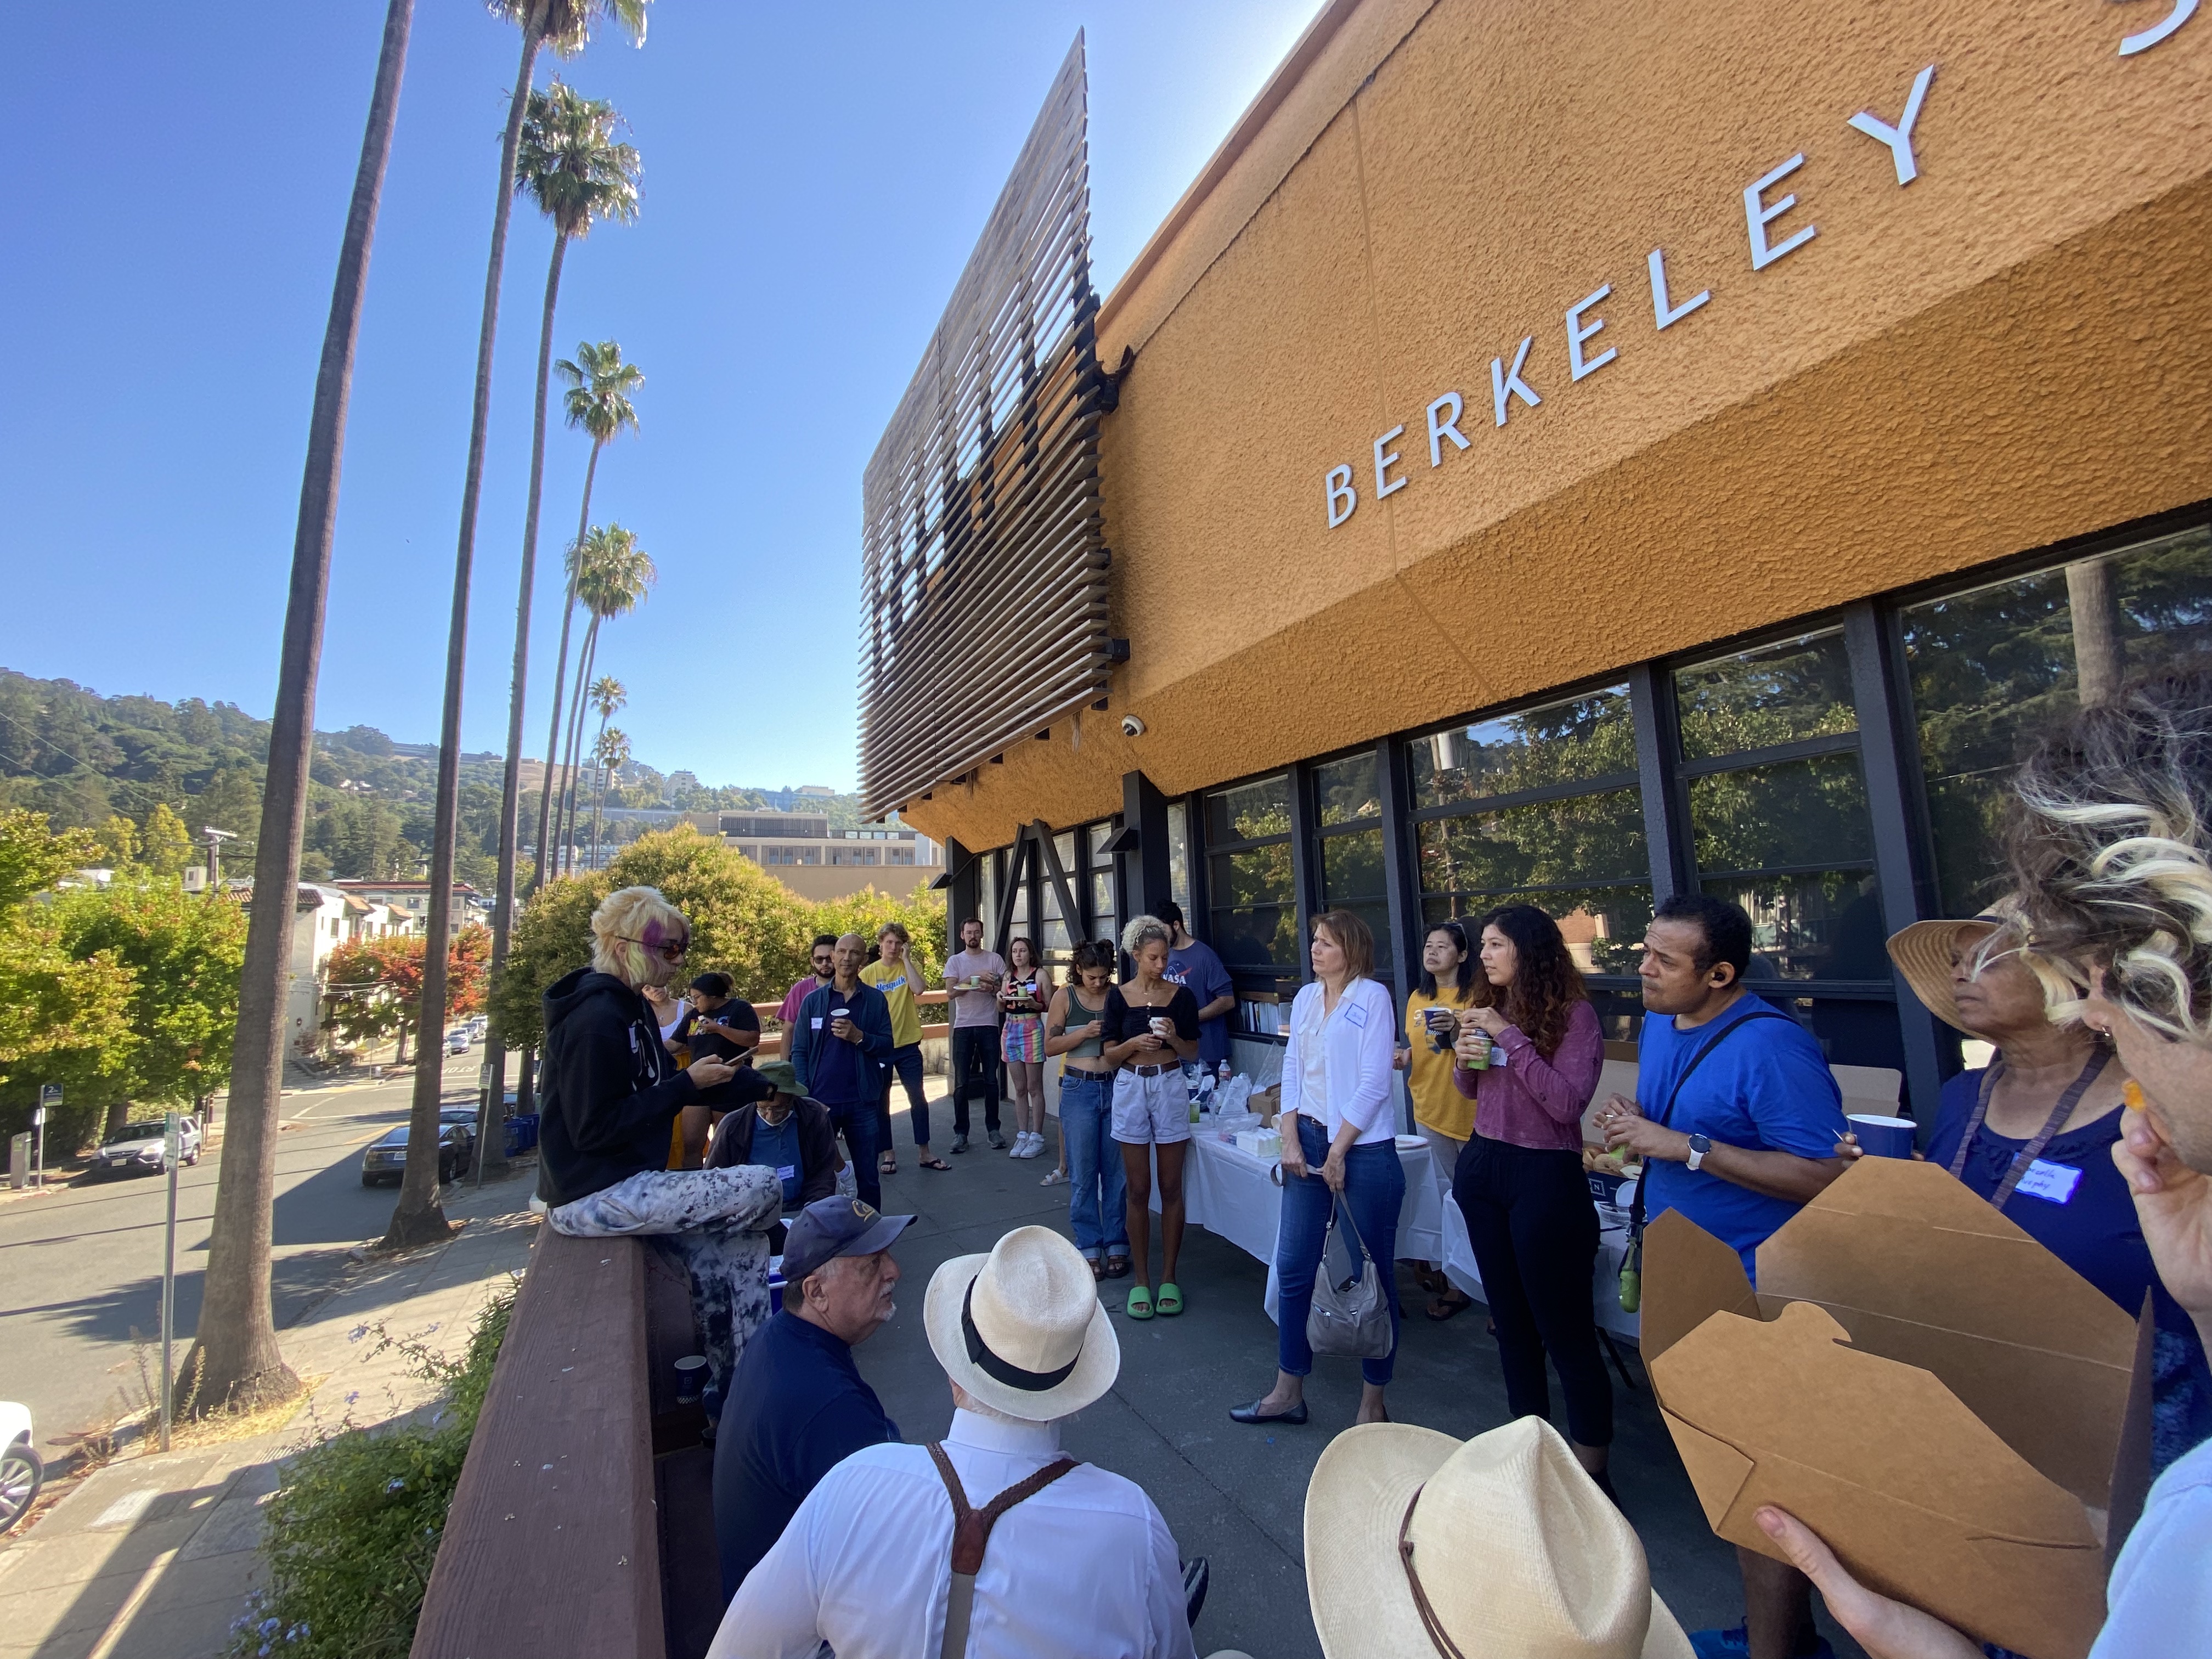 People gathered outside the central office on a clear, sunny day celebrating the 90th anniversary of the Berkeley Student Cooperative with the Berkeley hills in the background